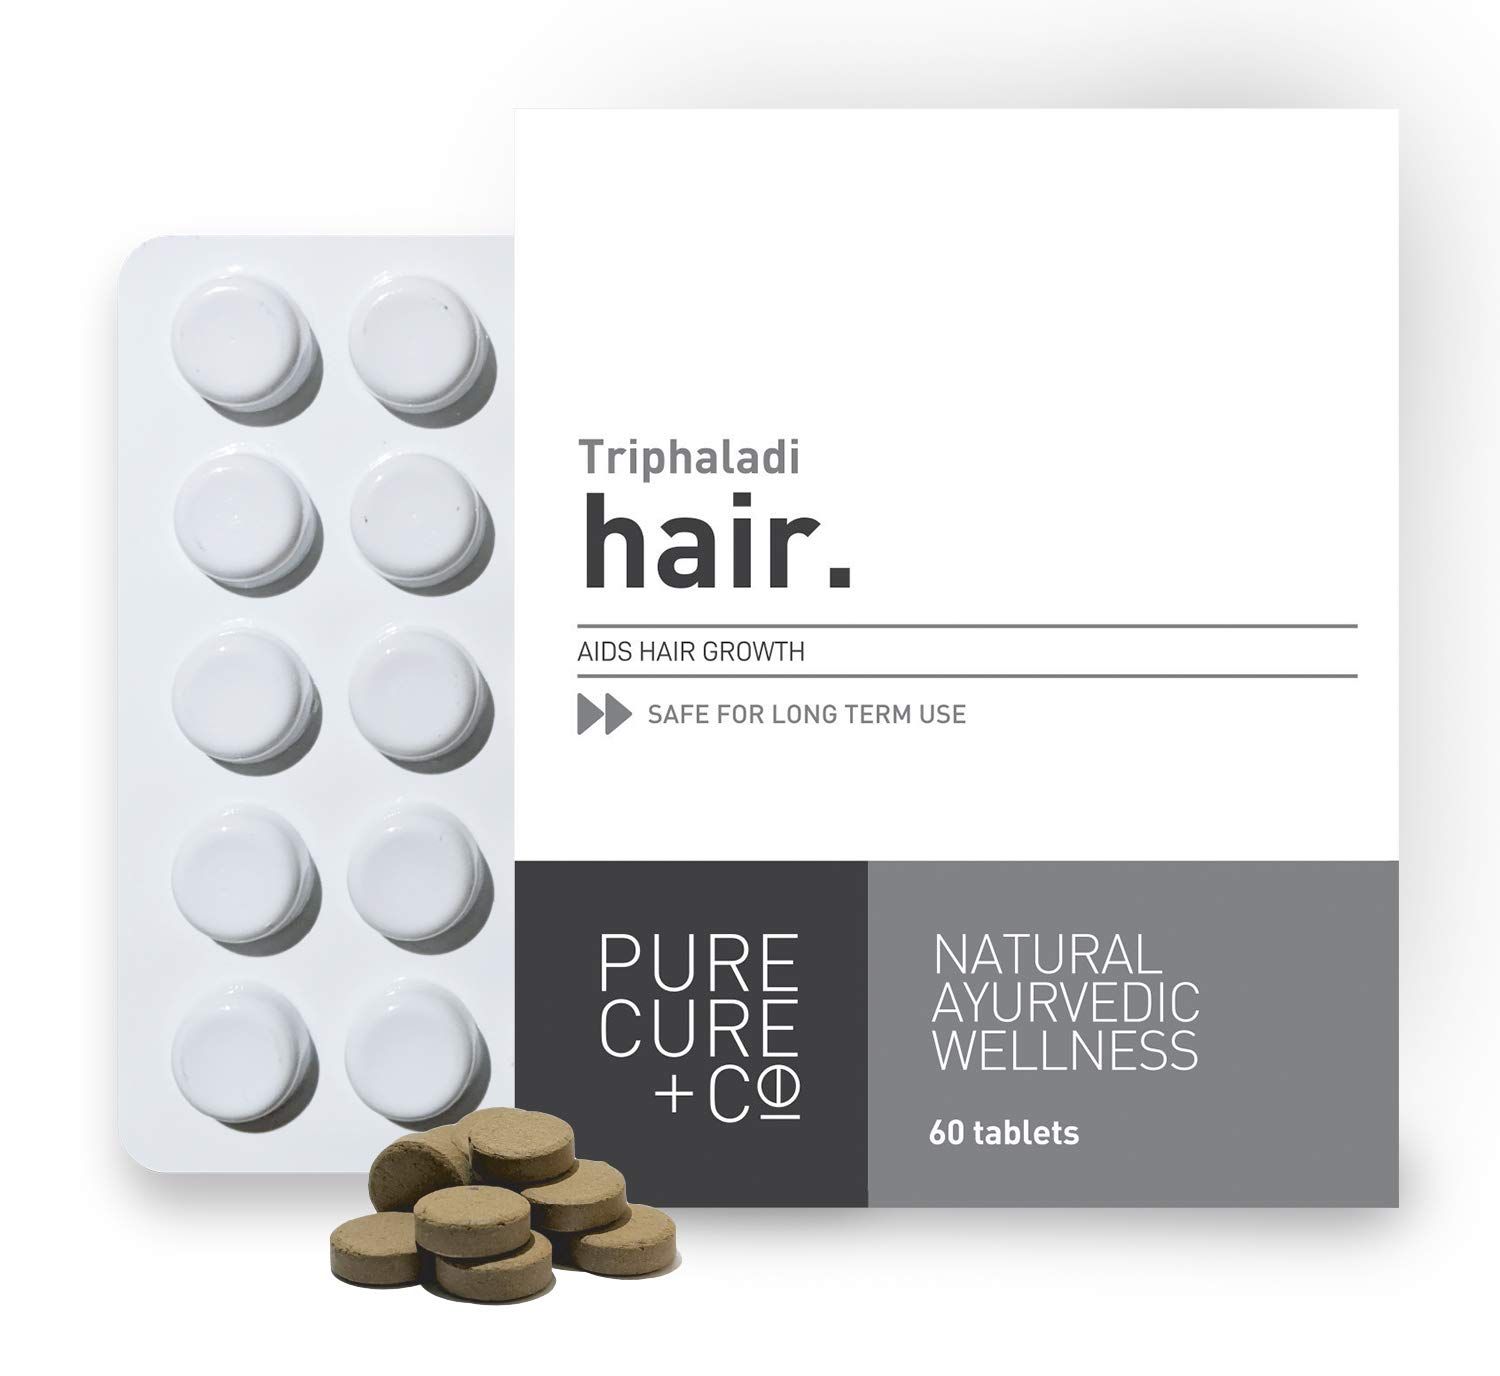 Pure Cure +Co Triphaladi Hair Growth Tablets Image